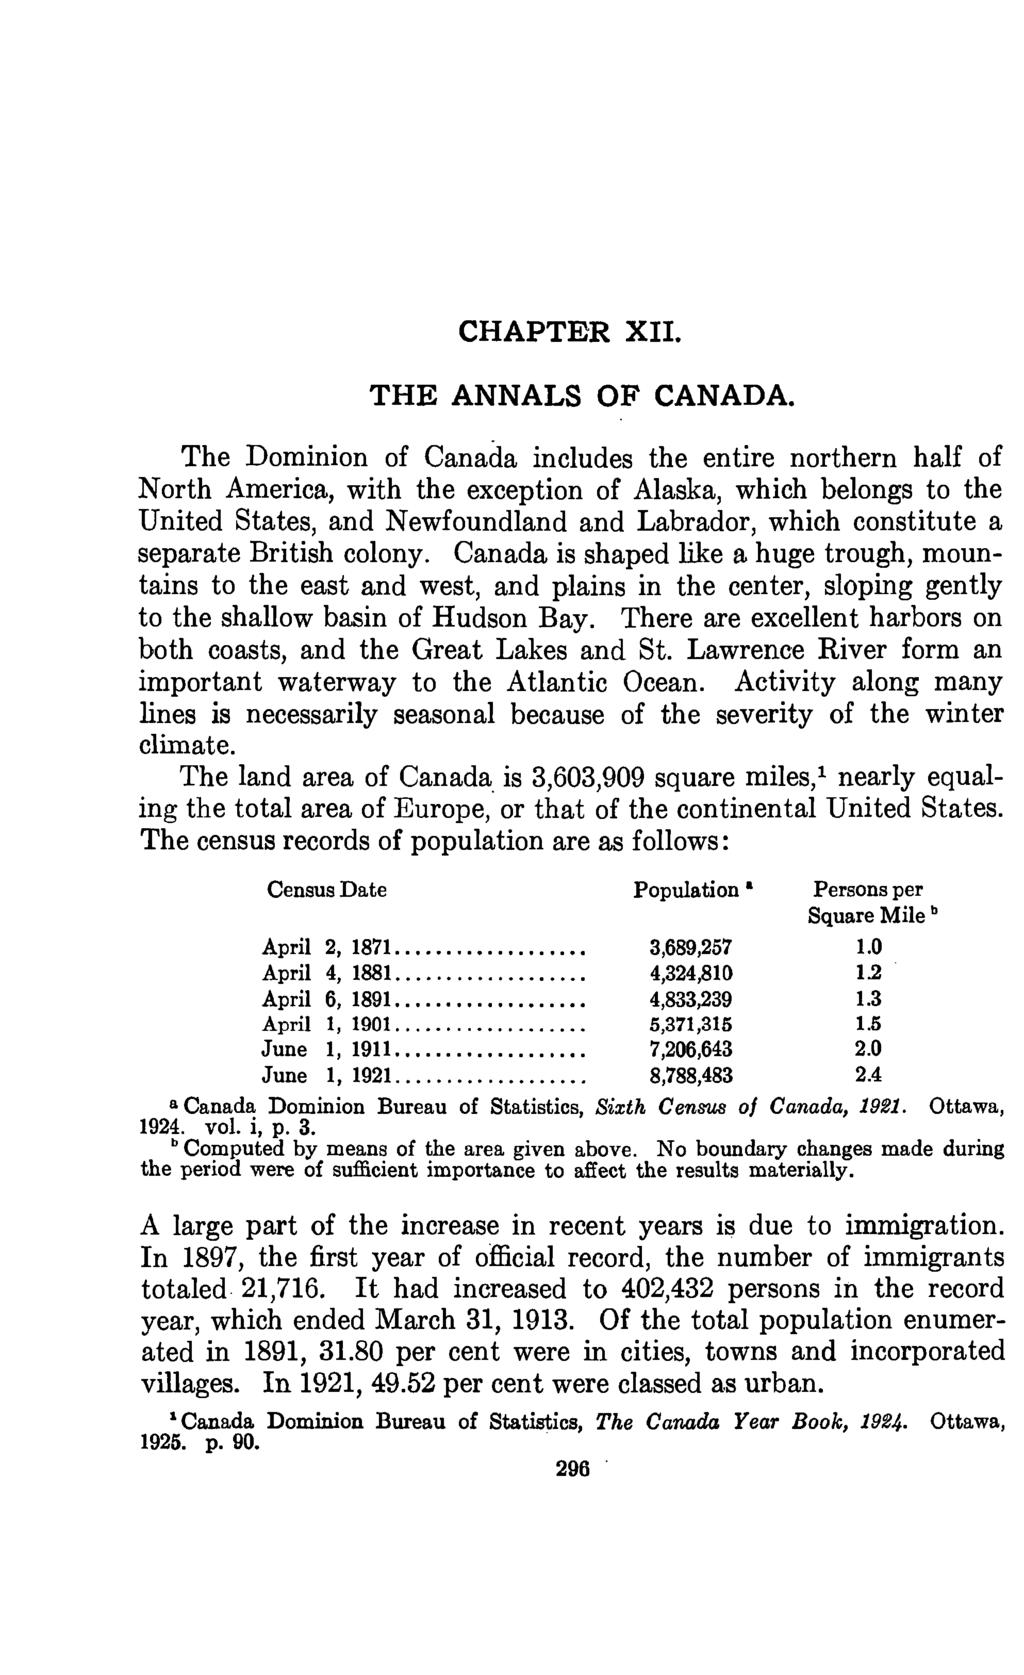 CHAPTER XII. THE ANNALS OF CANADA.